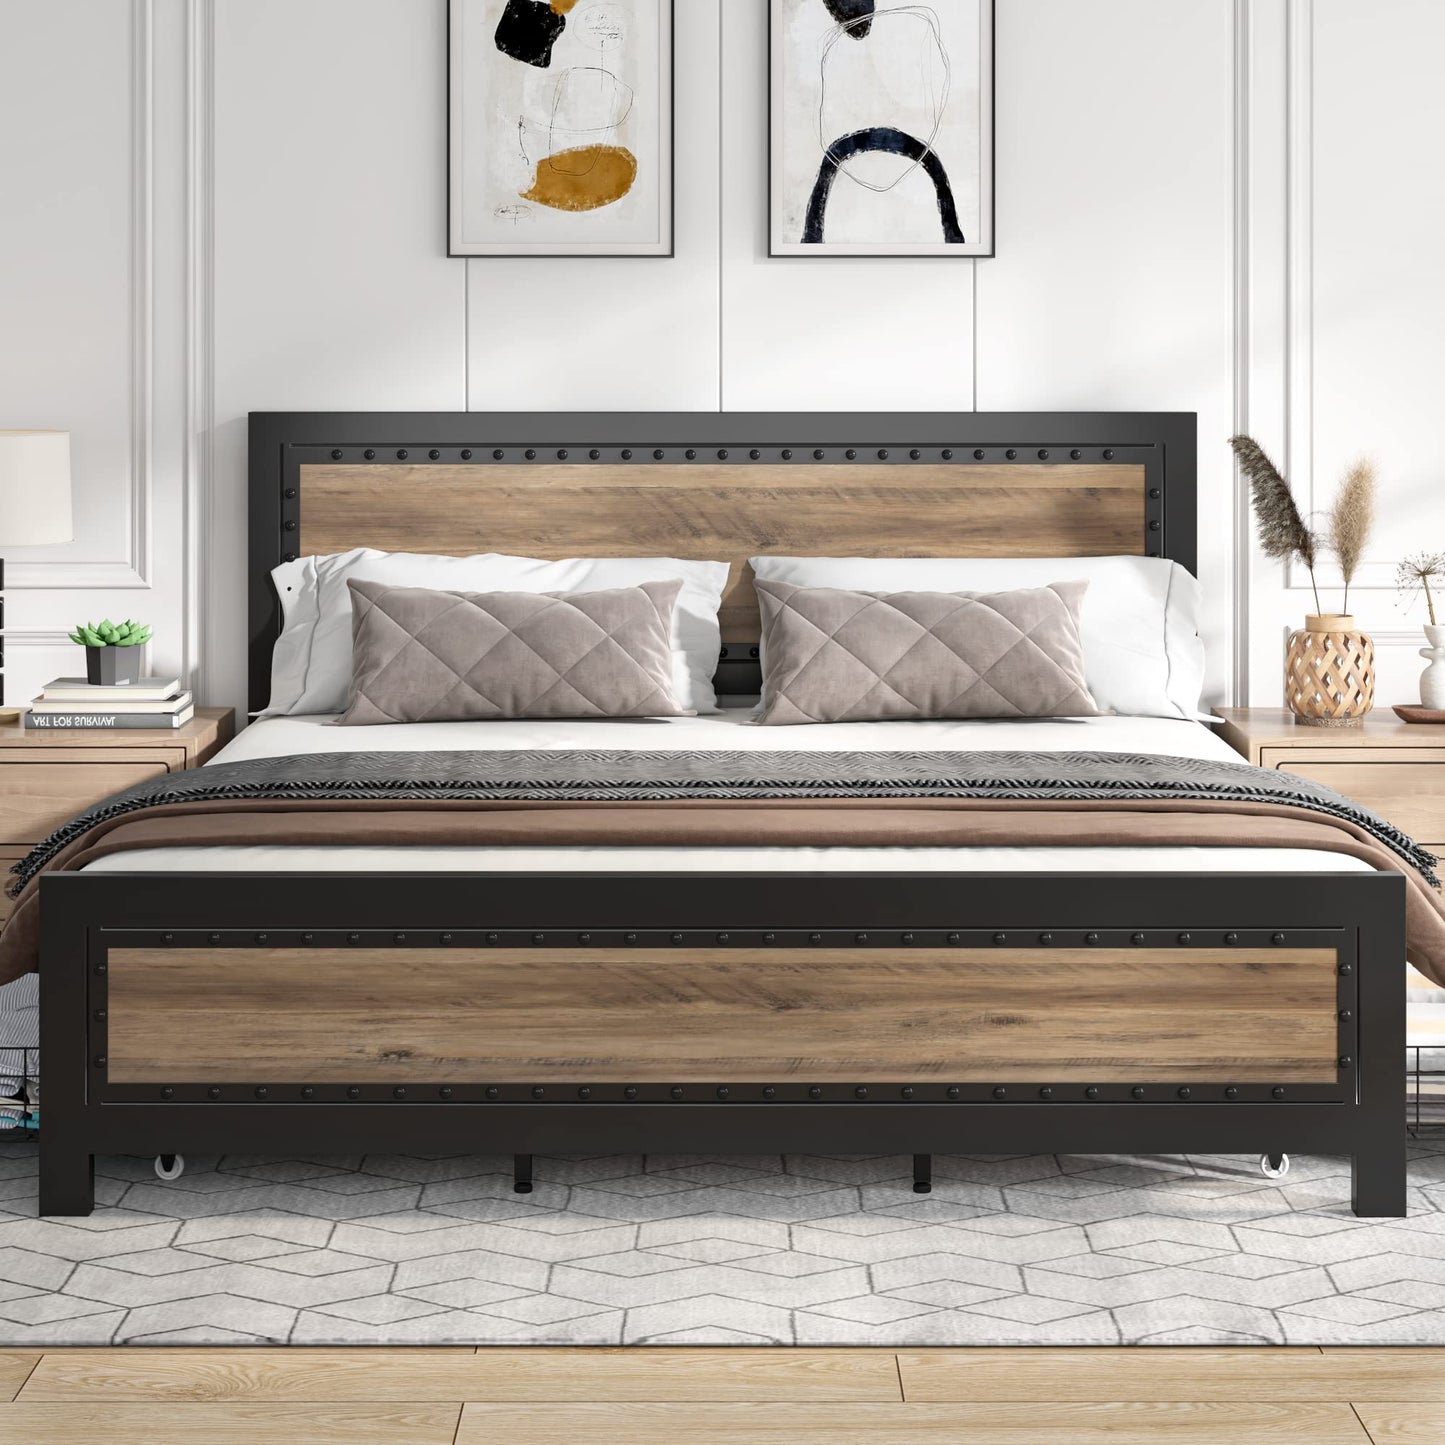 Keyluv Queen Size Bed Frame with 4 Storage Drawers, Rivet Modern Headboard and Footboard Platform Bed with Solid Wood Slats Support, No Box Spring